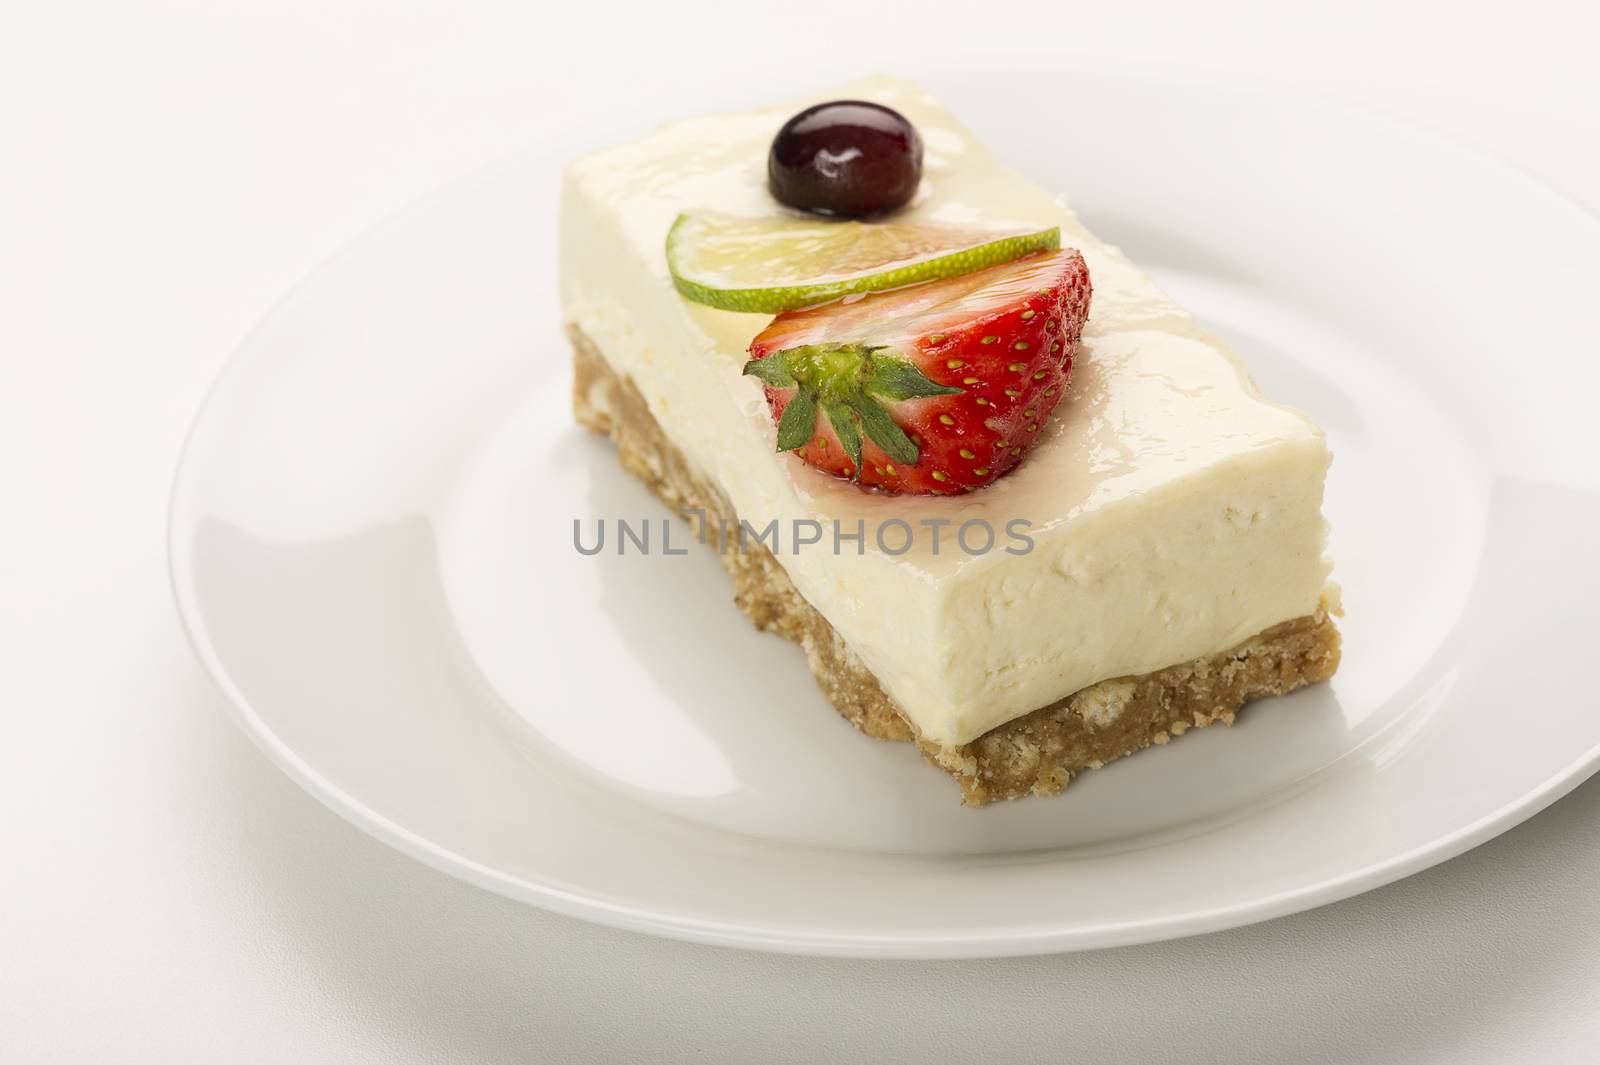 Slice of delicious tangy lemon cheesecake on a biscuit base topped with fresh strawberry and a slice of lemon or lime